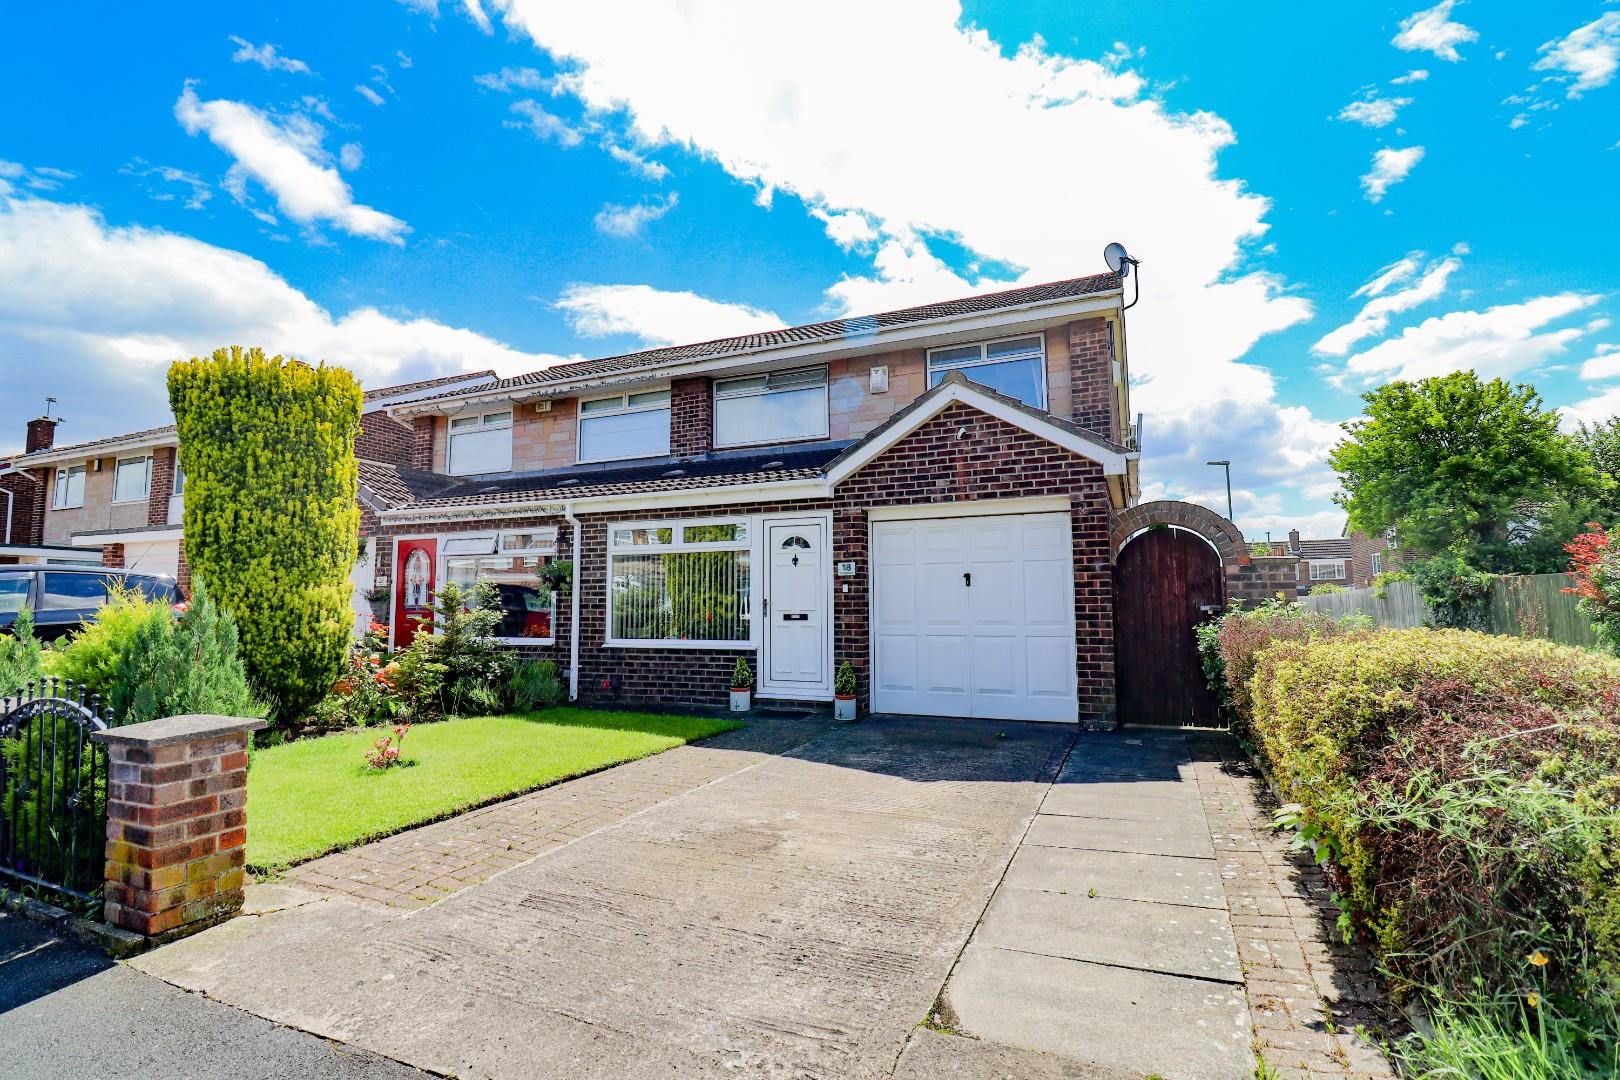 Chadderton Drive, Stainsby HIll, Thornaby, TS17 9QG